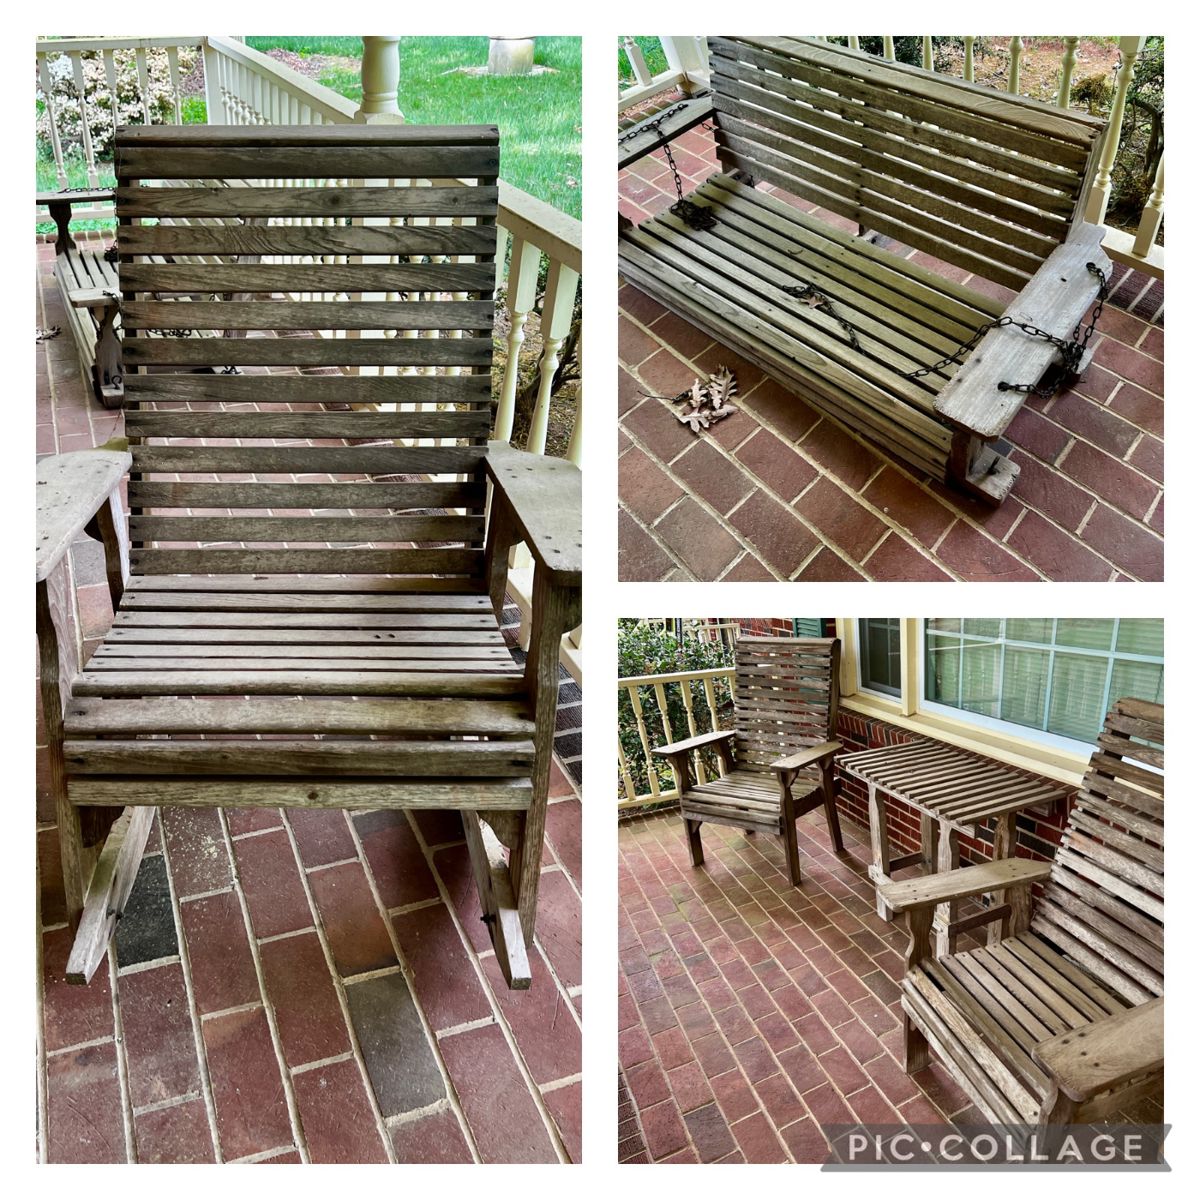 Swing -$75
Chairs & table $100
Rocking chair -$50